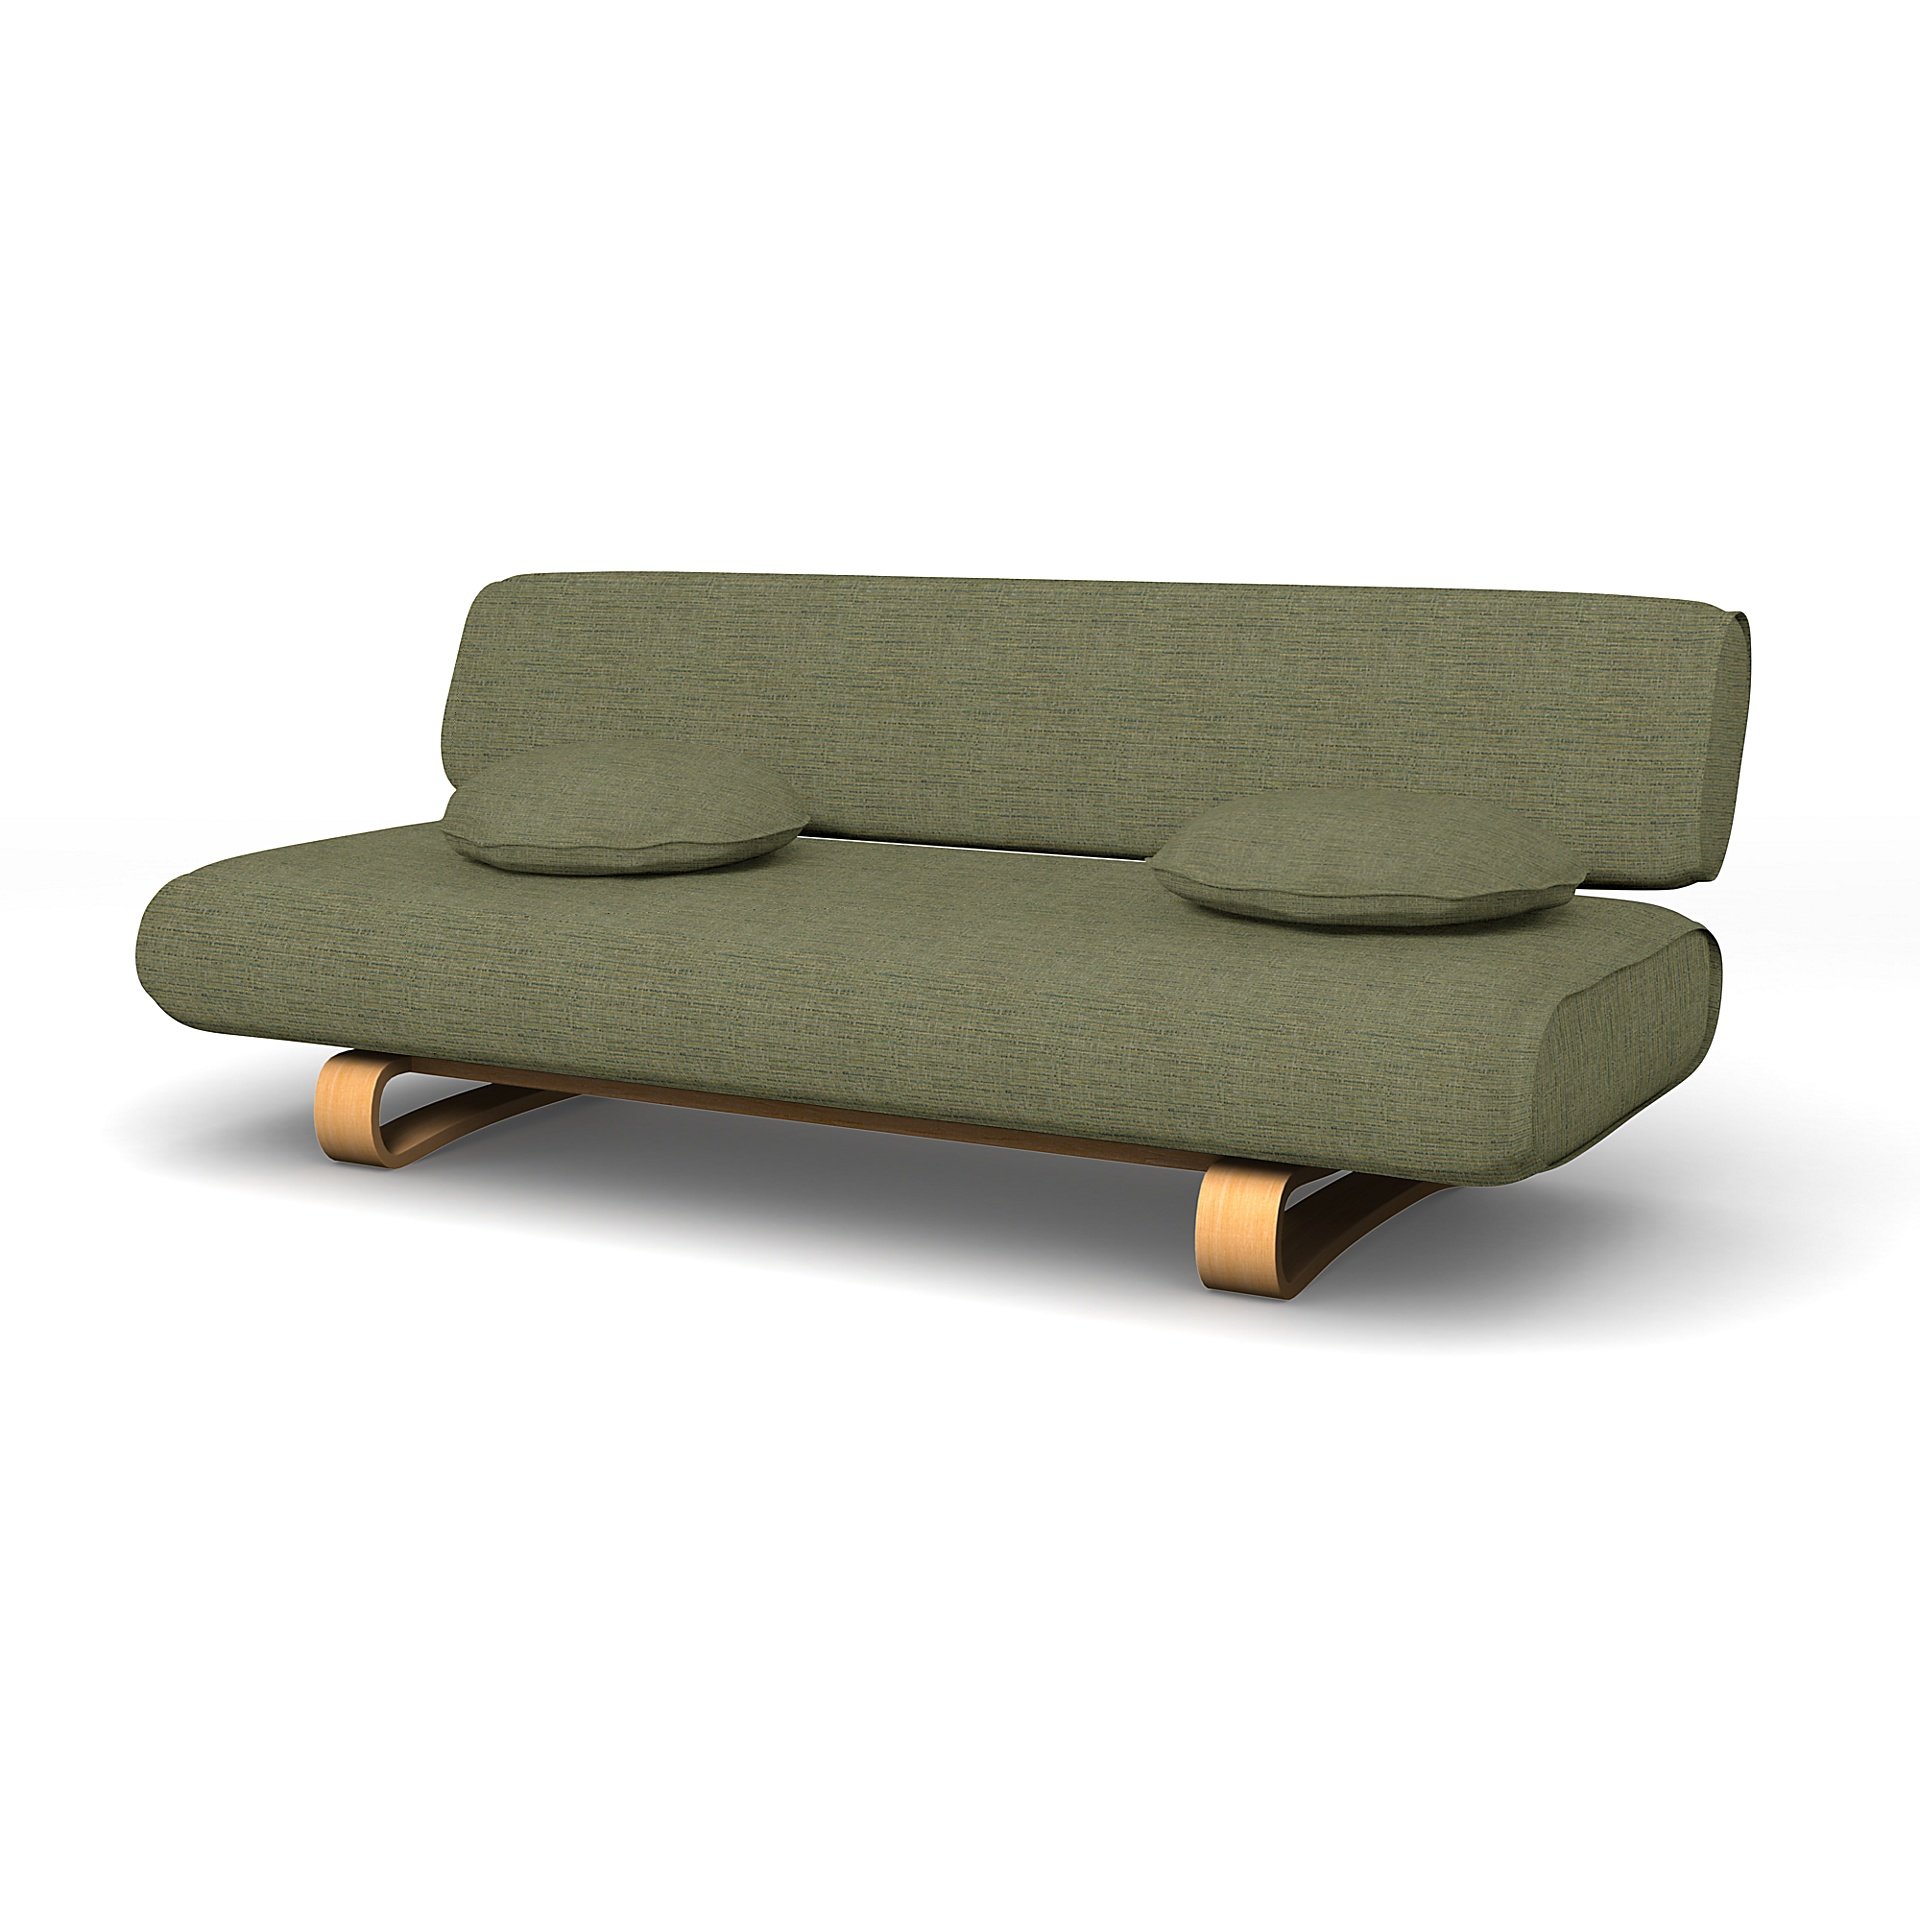 IKEA - Allerum Sofa Bed Cover, Meadow Green, Boucle & Texture - Bemz